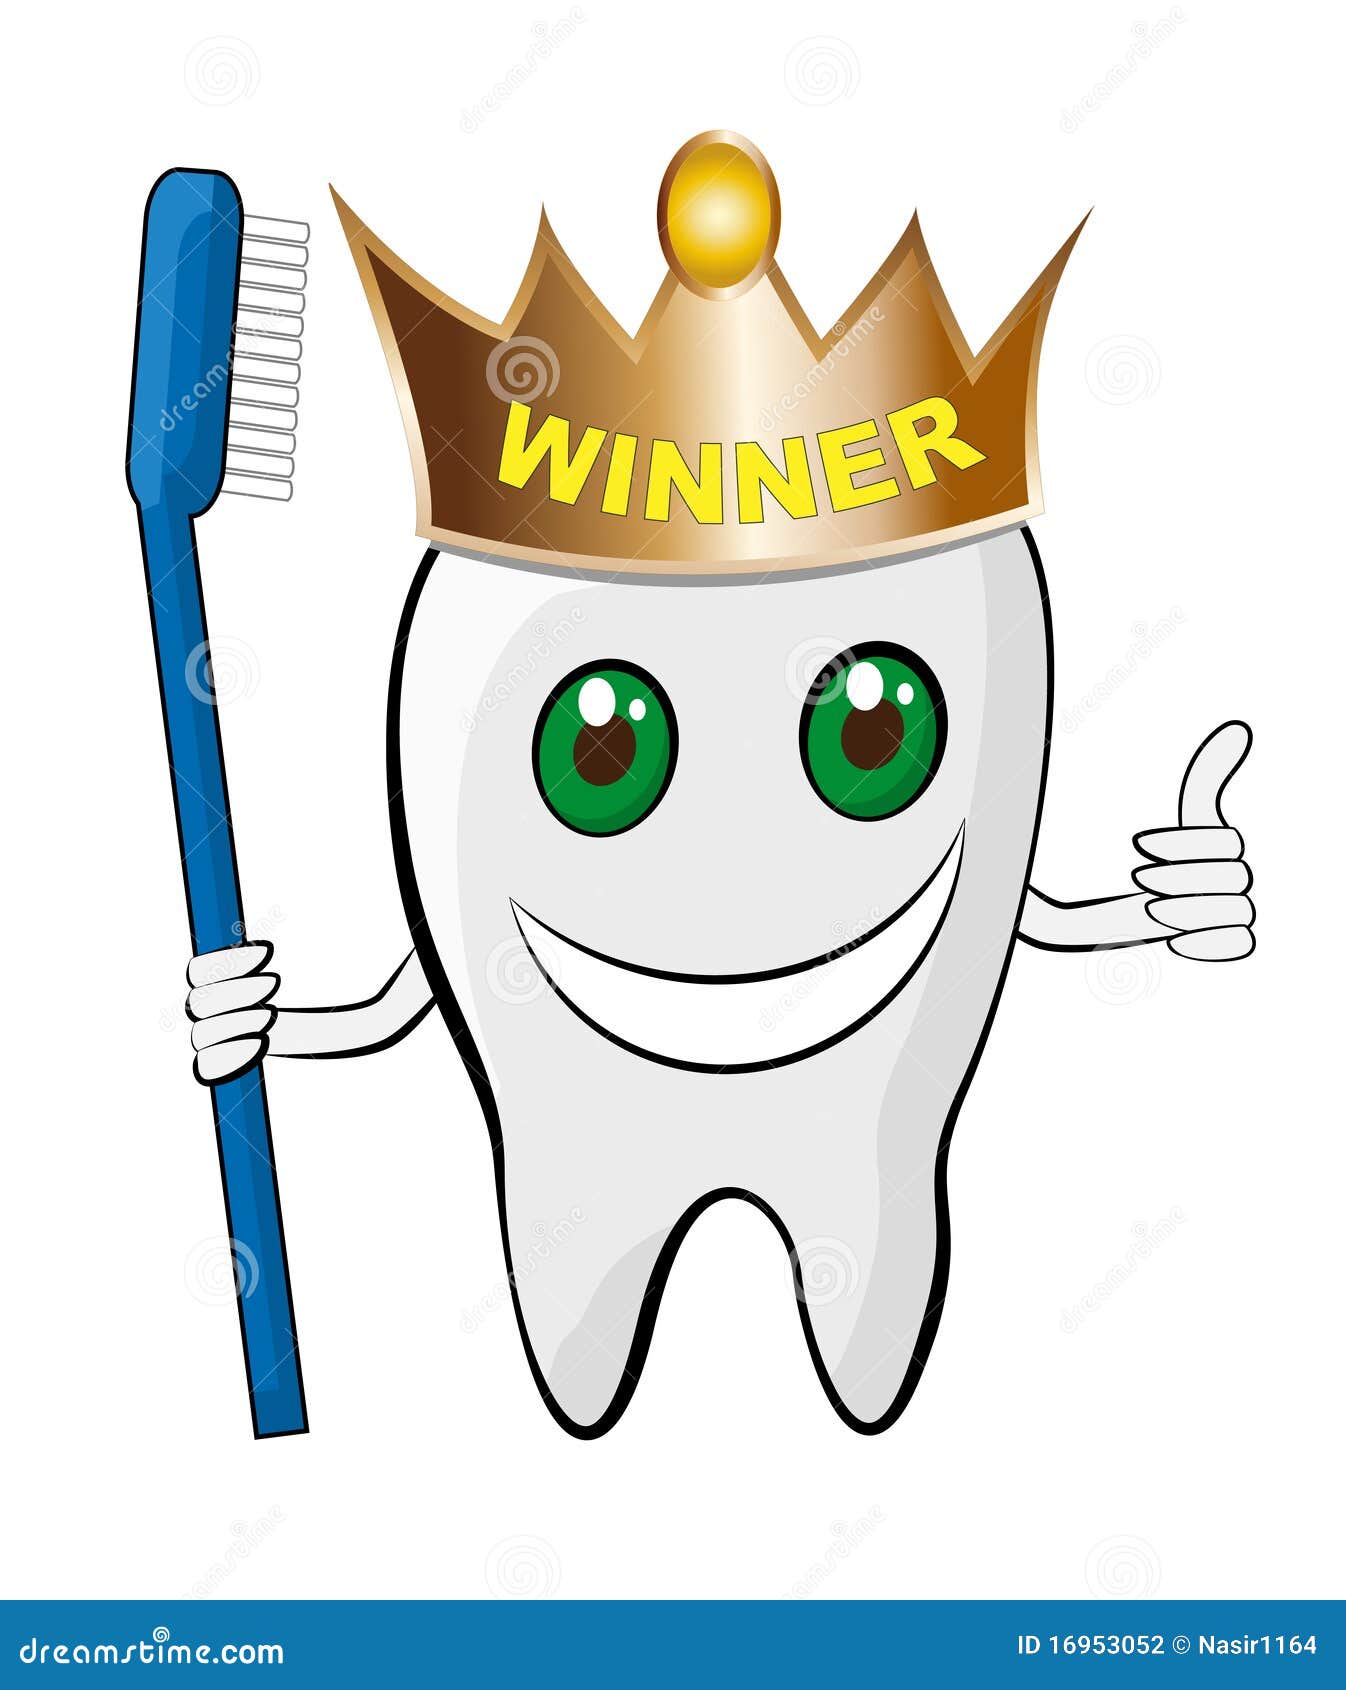 Illustration of happy and healthy winner tooth with brush.